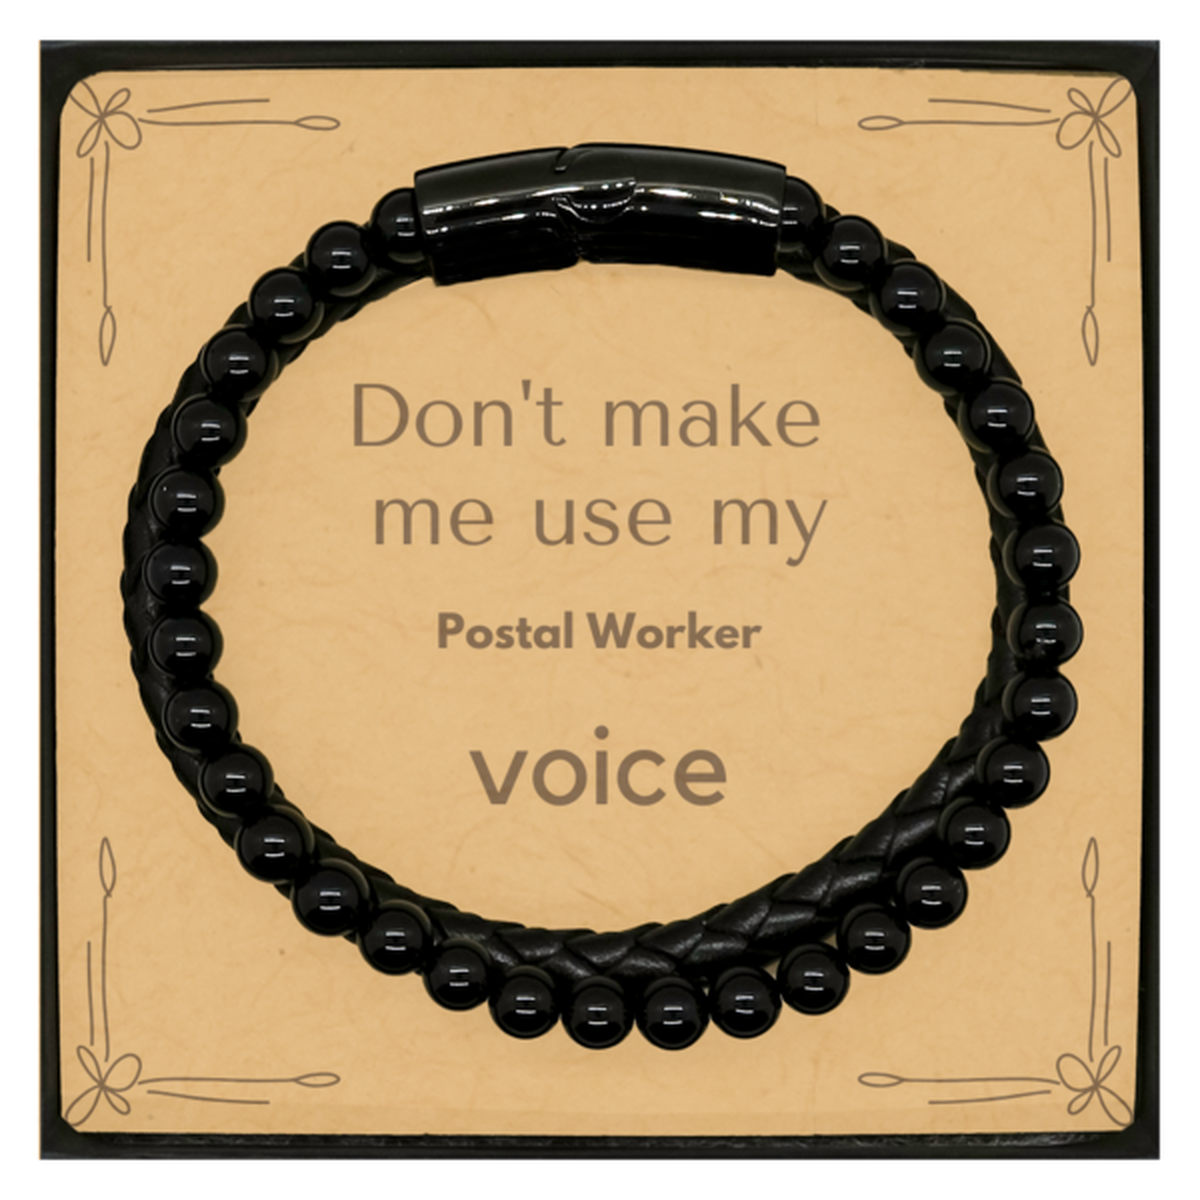 Don't make me use my Postal Worker voice, Sarcasm Postal Worker Card Gifts, Christmas Postal Worker Stone Leather Bracelets Birthday Unique Gifts For Postal Worker Coworkers, Men, Women, Colleague, Friends